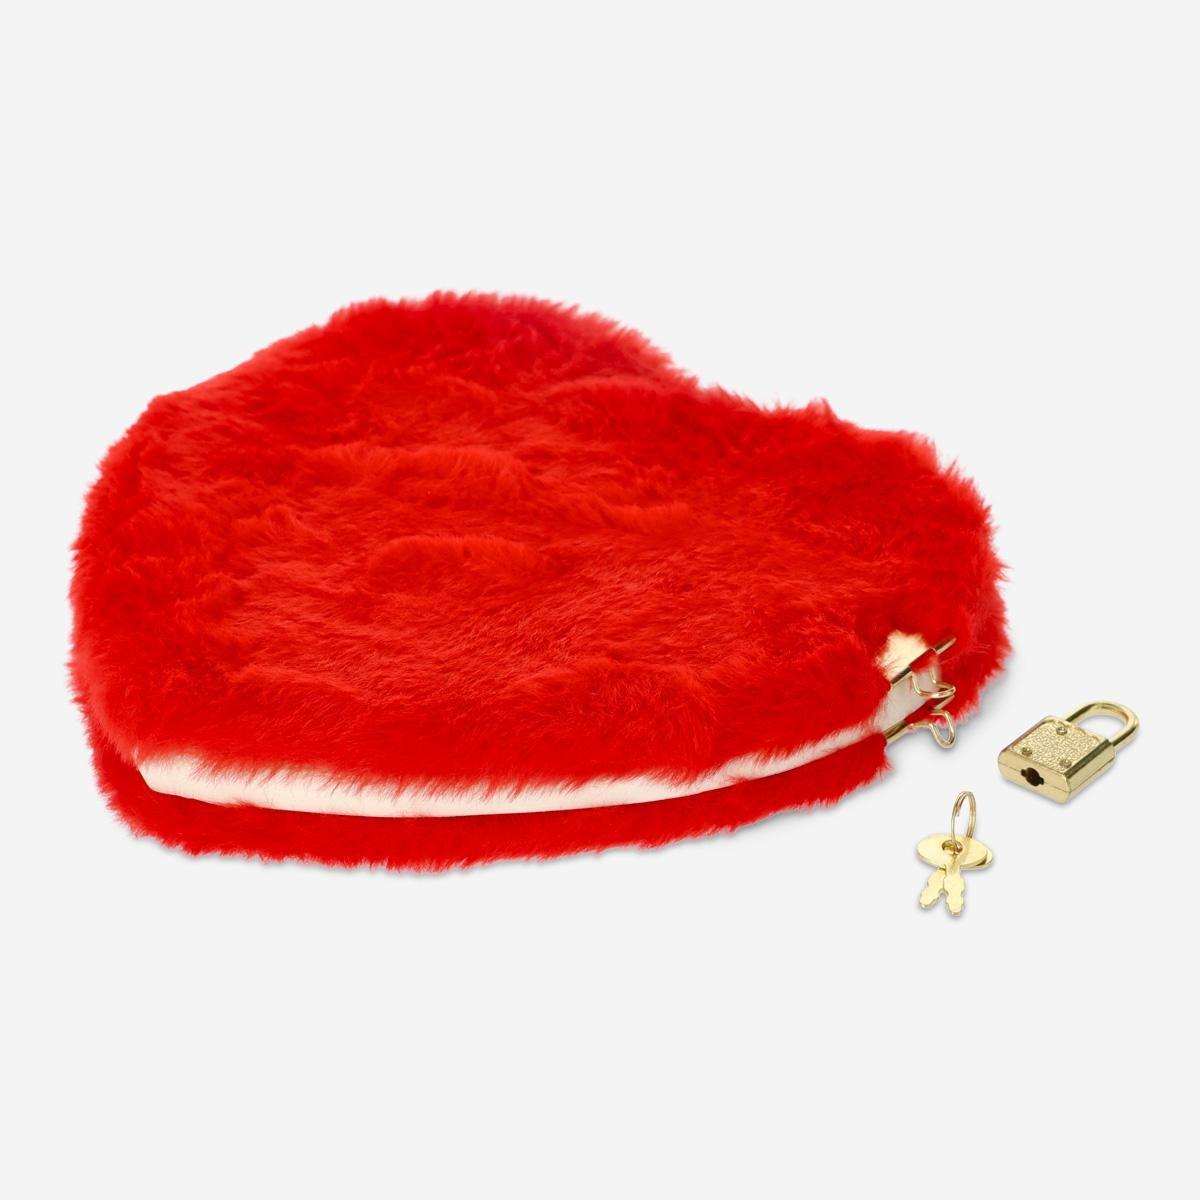 Red fur heart notebook with lock